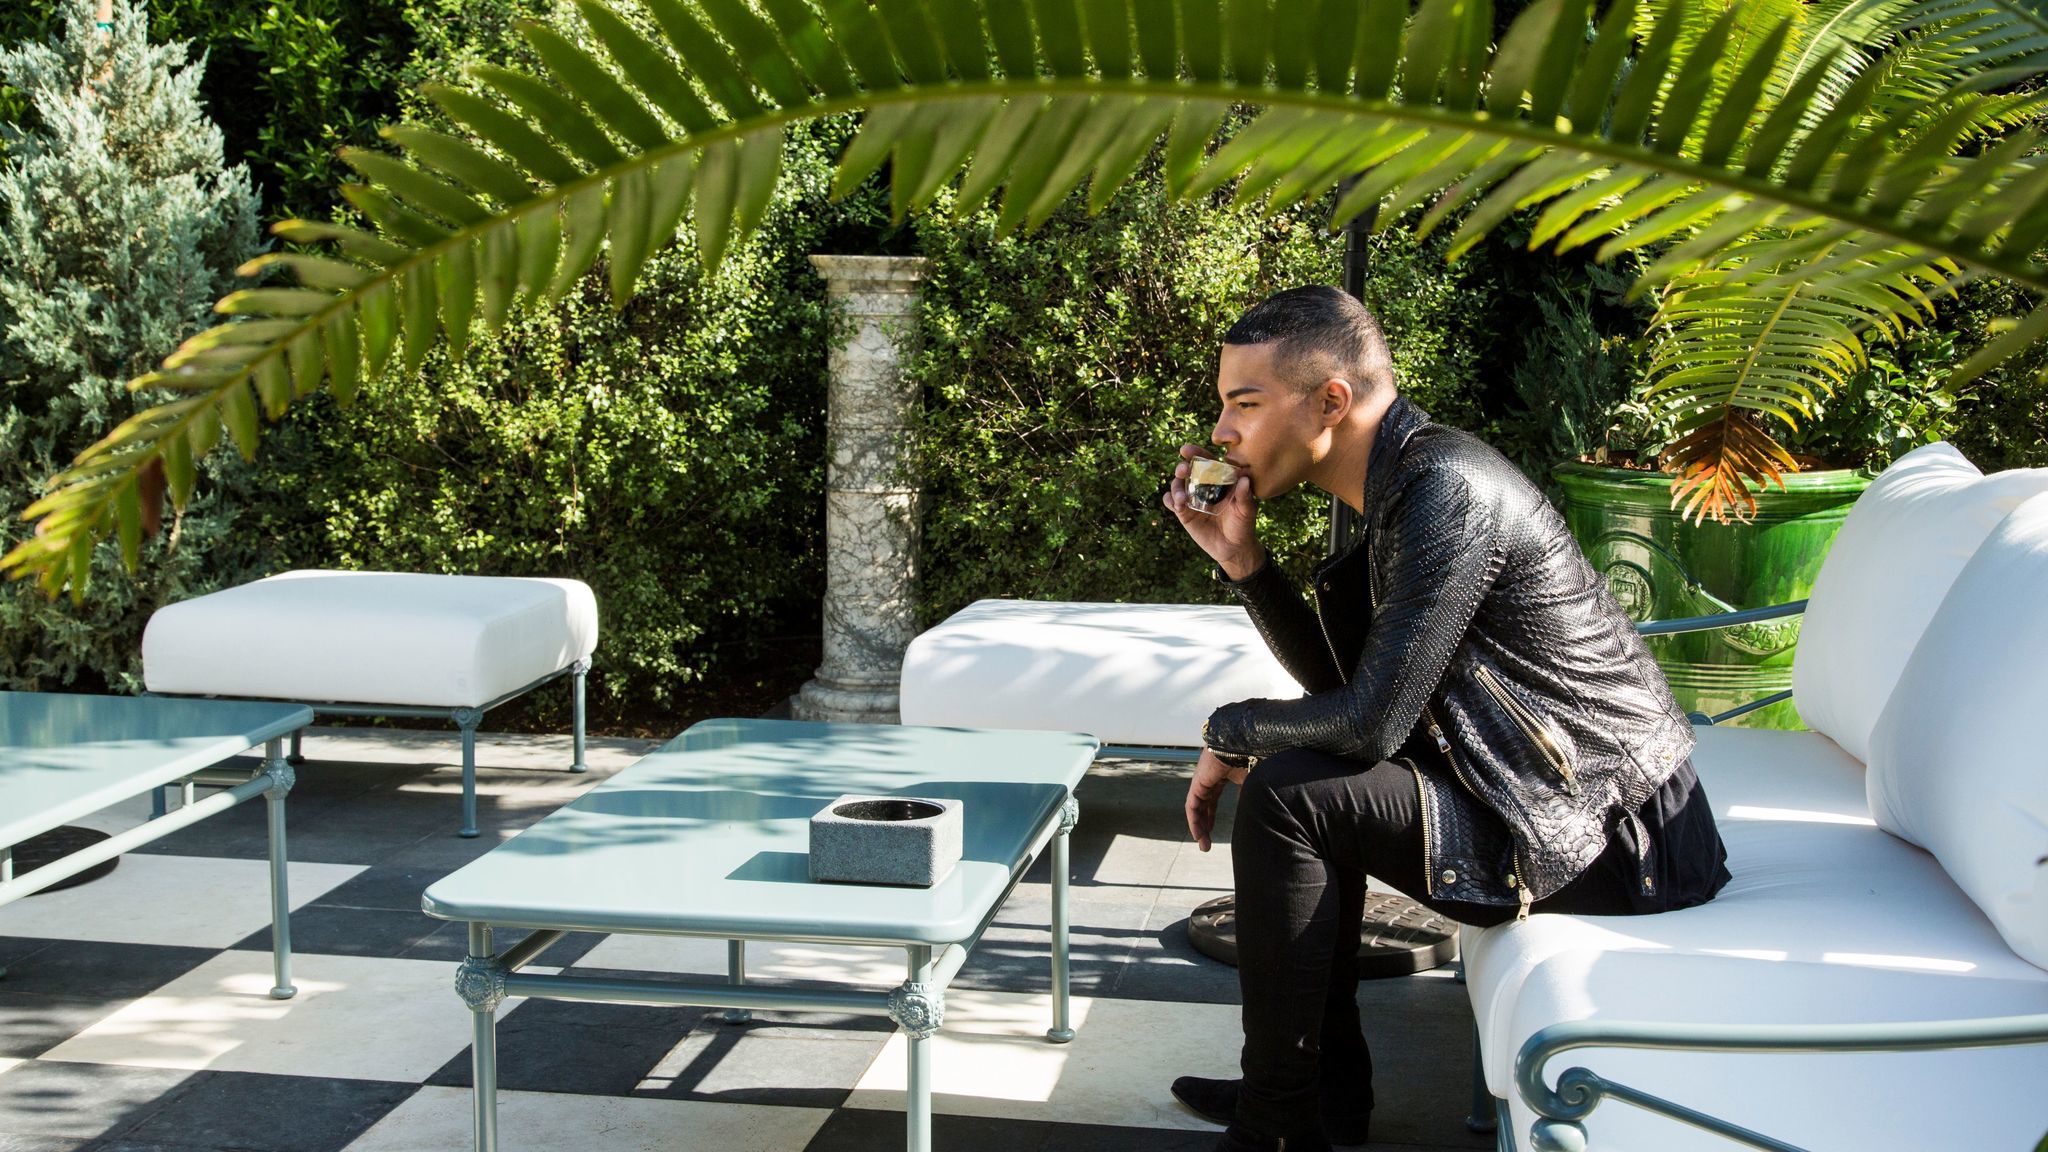 Rousteing taking a break in the outside garden at Balmain's new flagship store in Los Angeles.